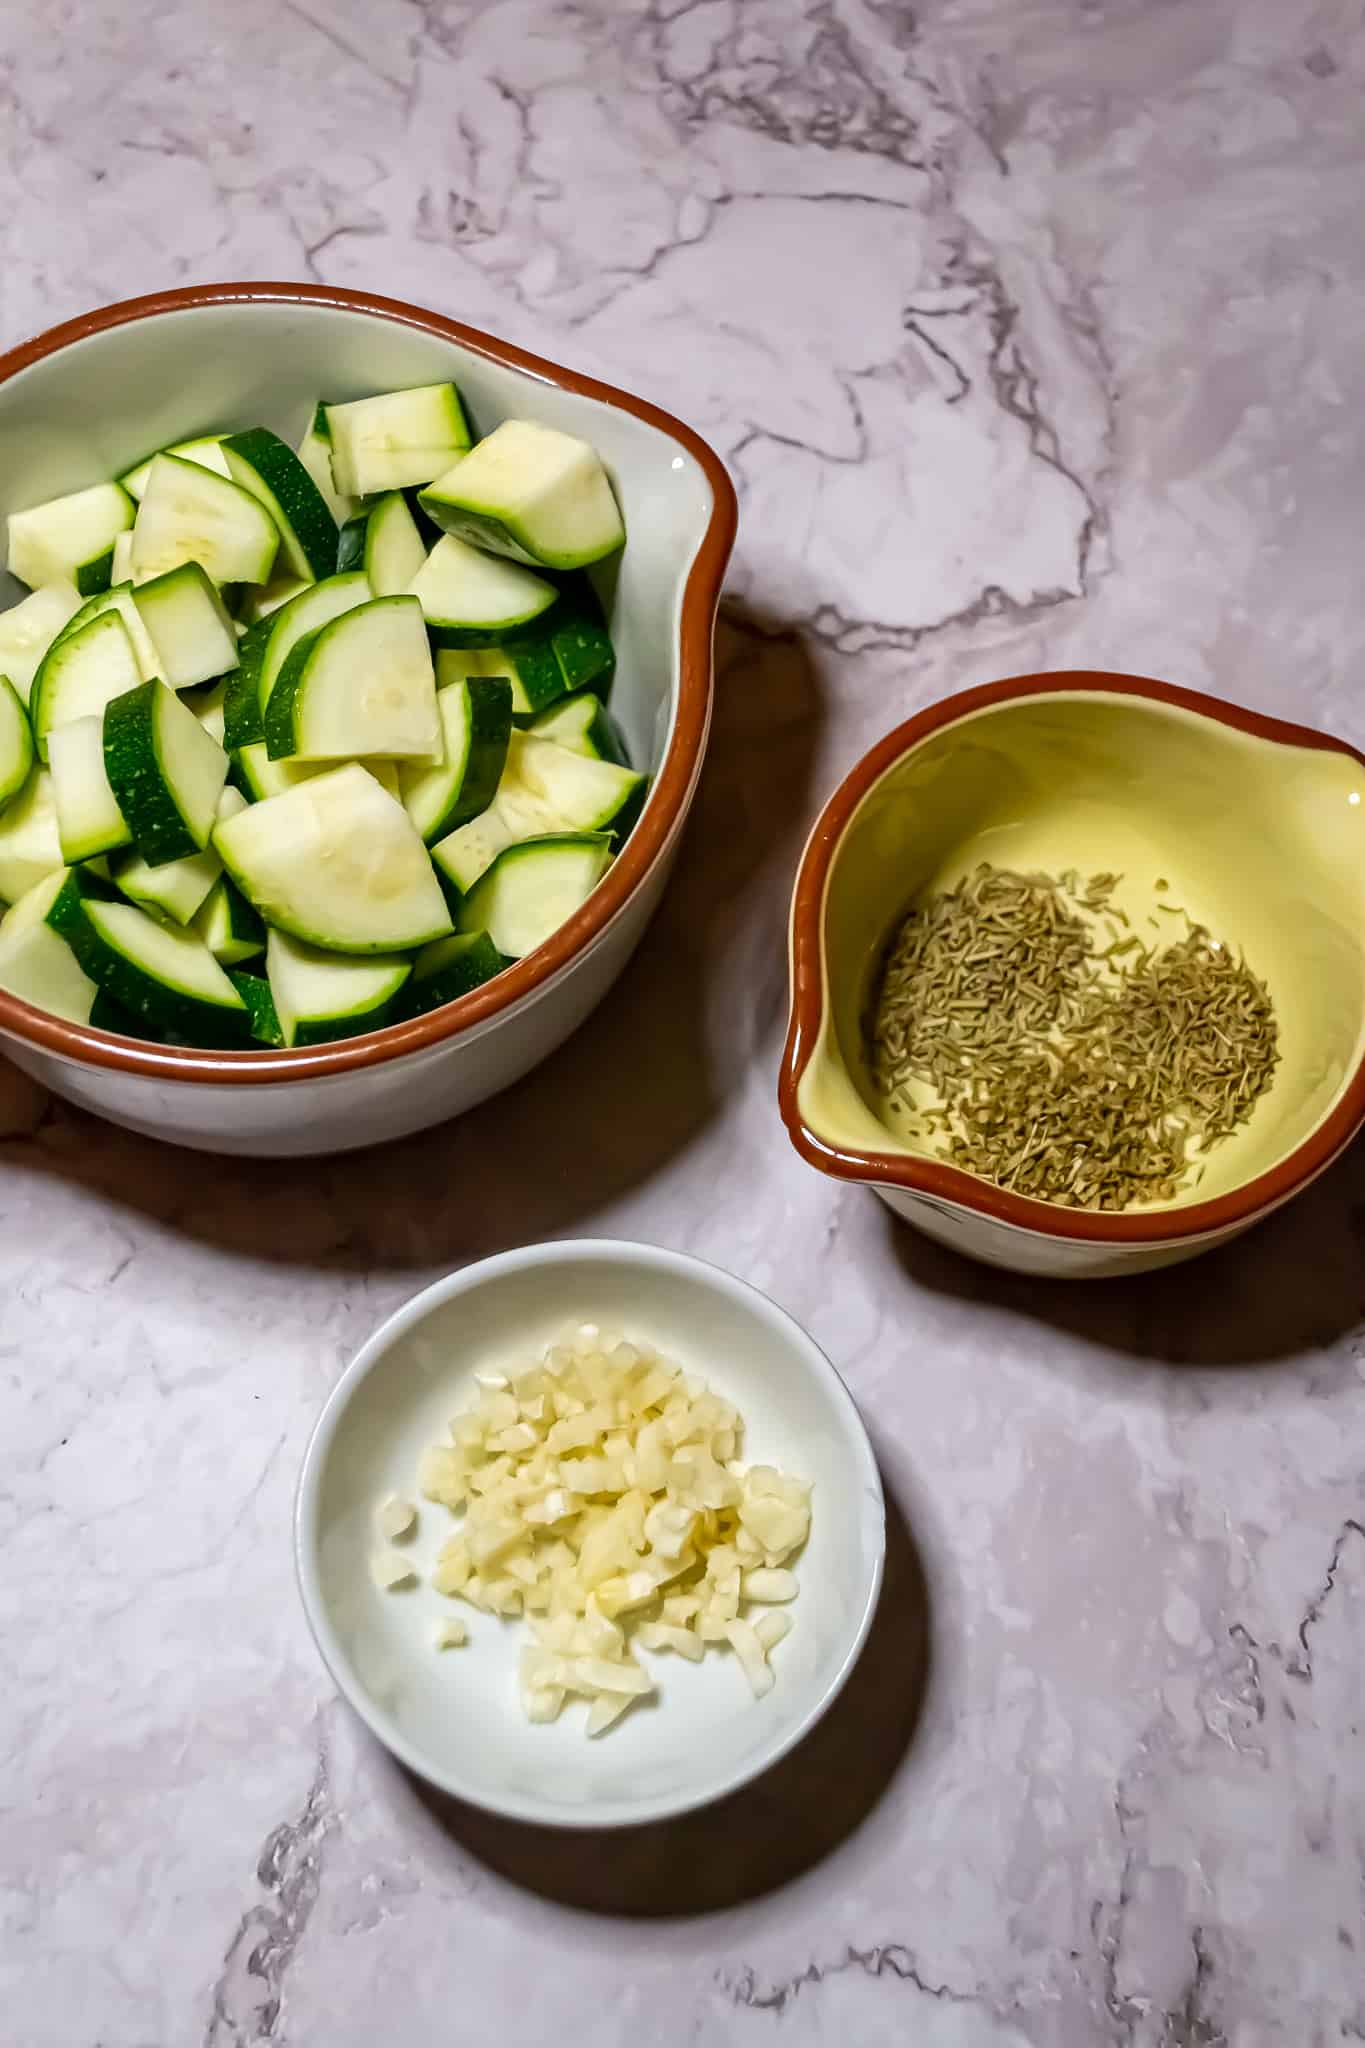 Top view of a bowl of zucchini slices, a small bowl of diced garlic, and a bowl of herbs.